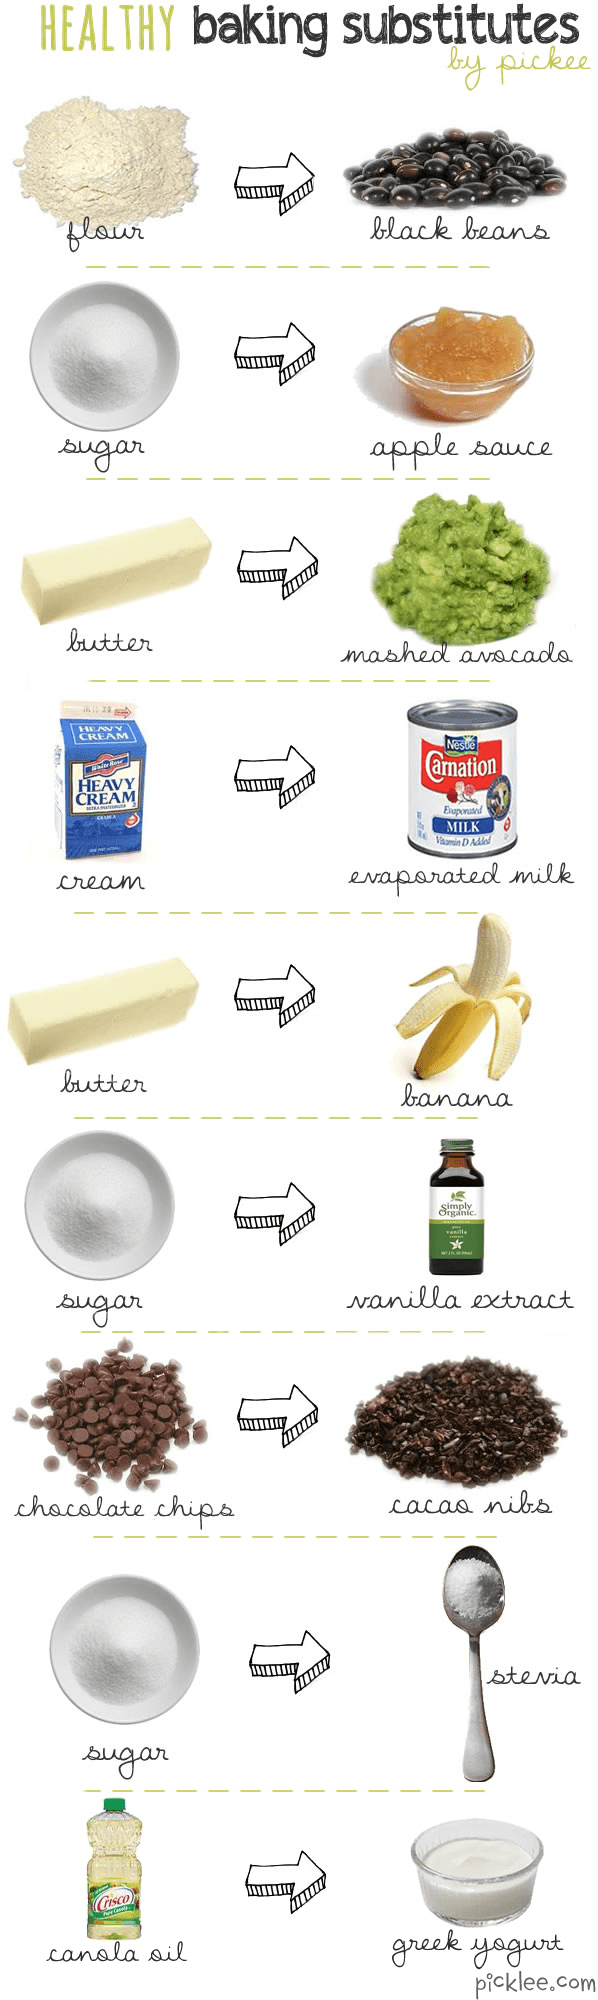 Butter vs. Oil in Baking: Which is Better? | Handle the Heat